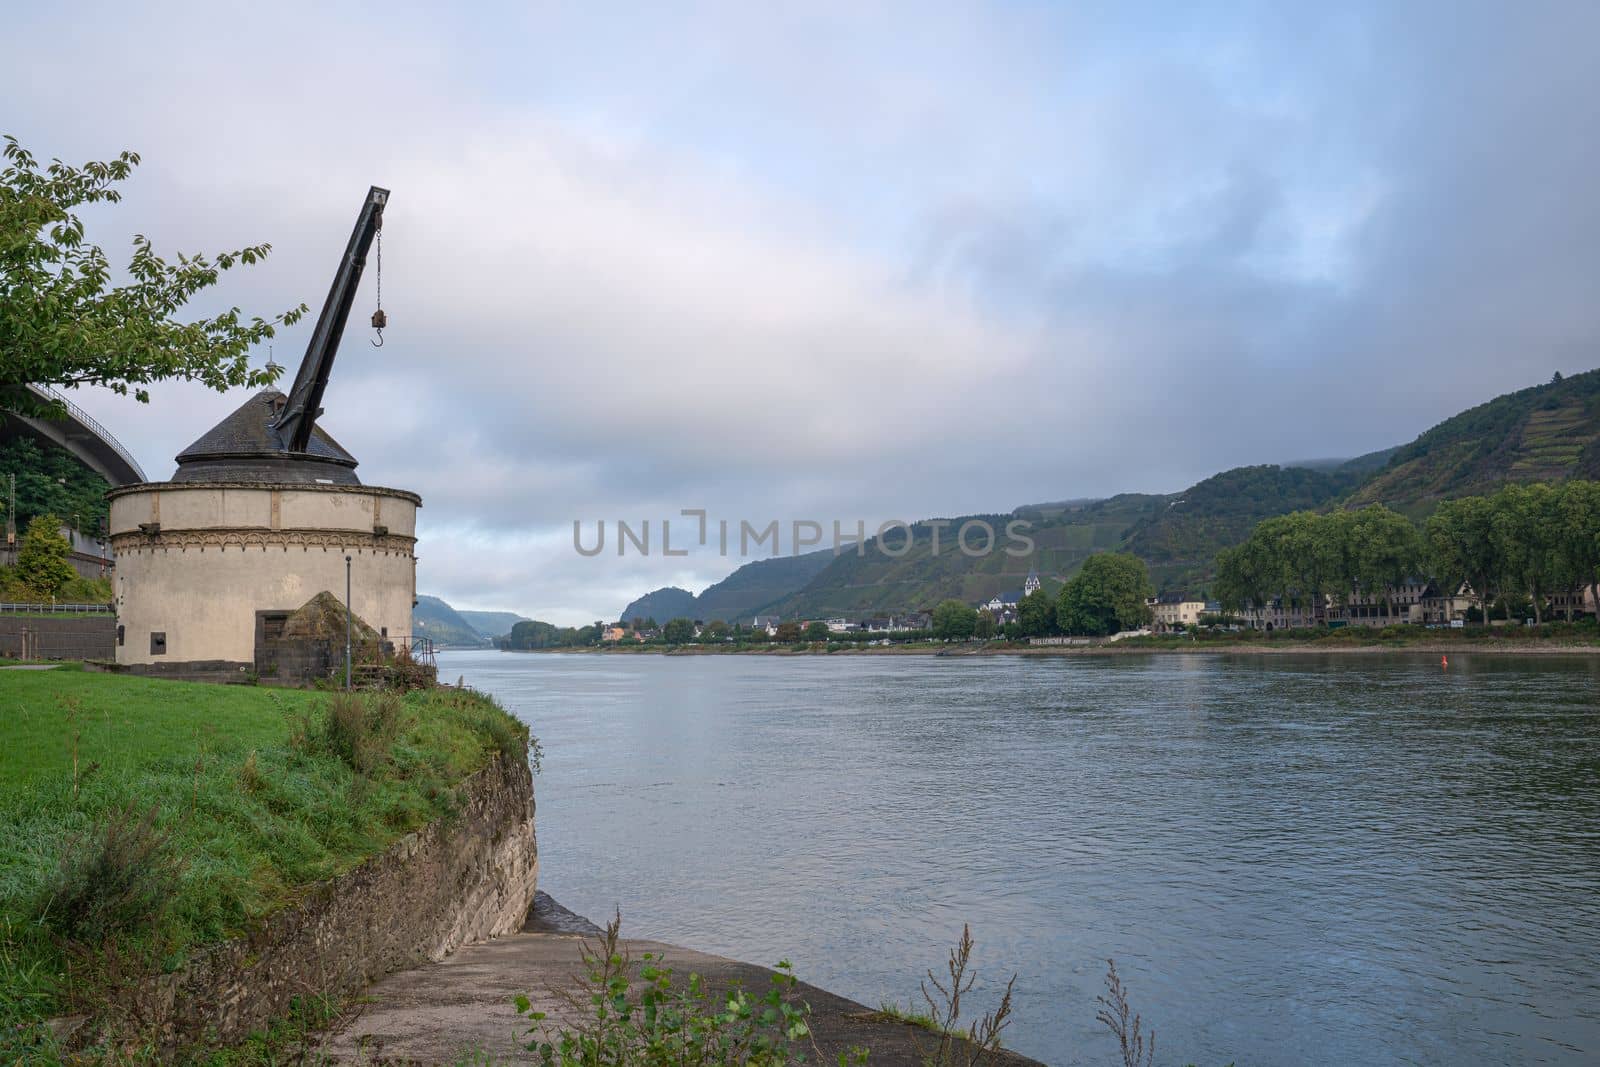 Panoramic image of historic crane close to the Rhine river, Andernach, Germany